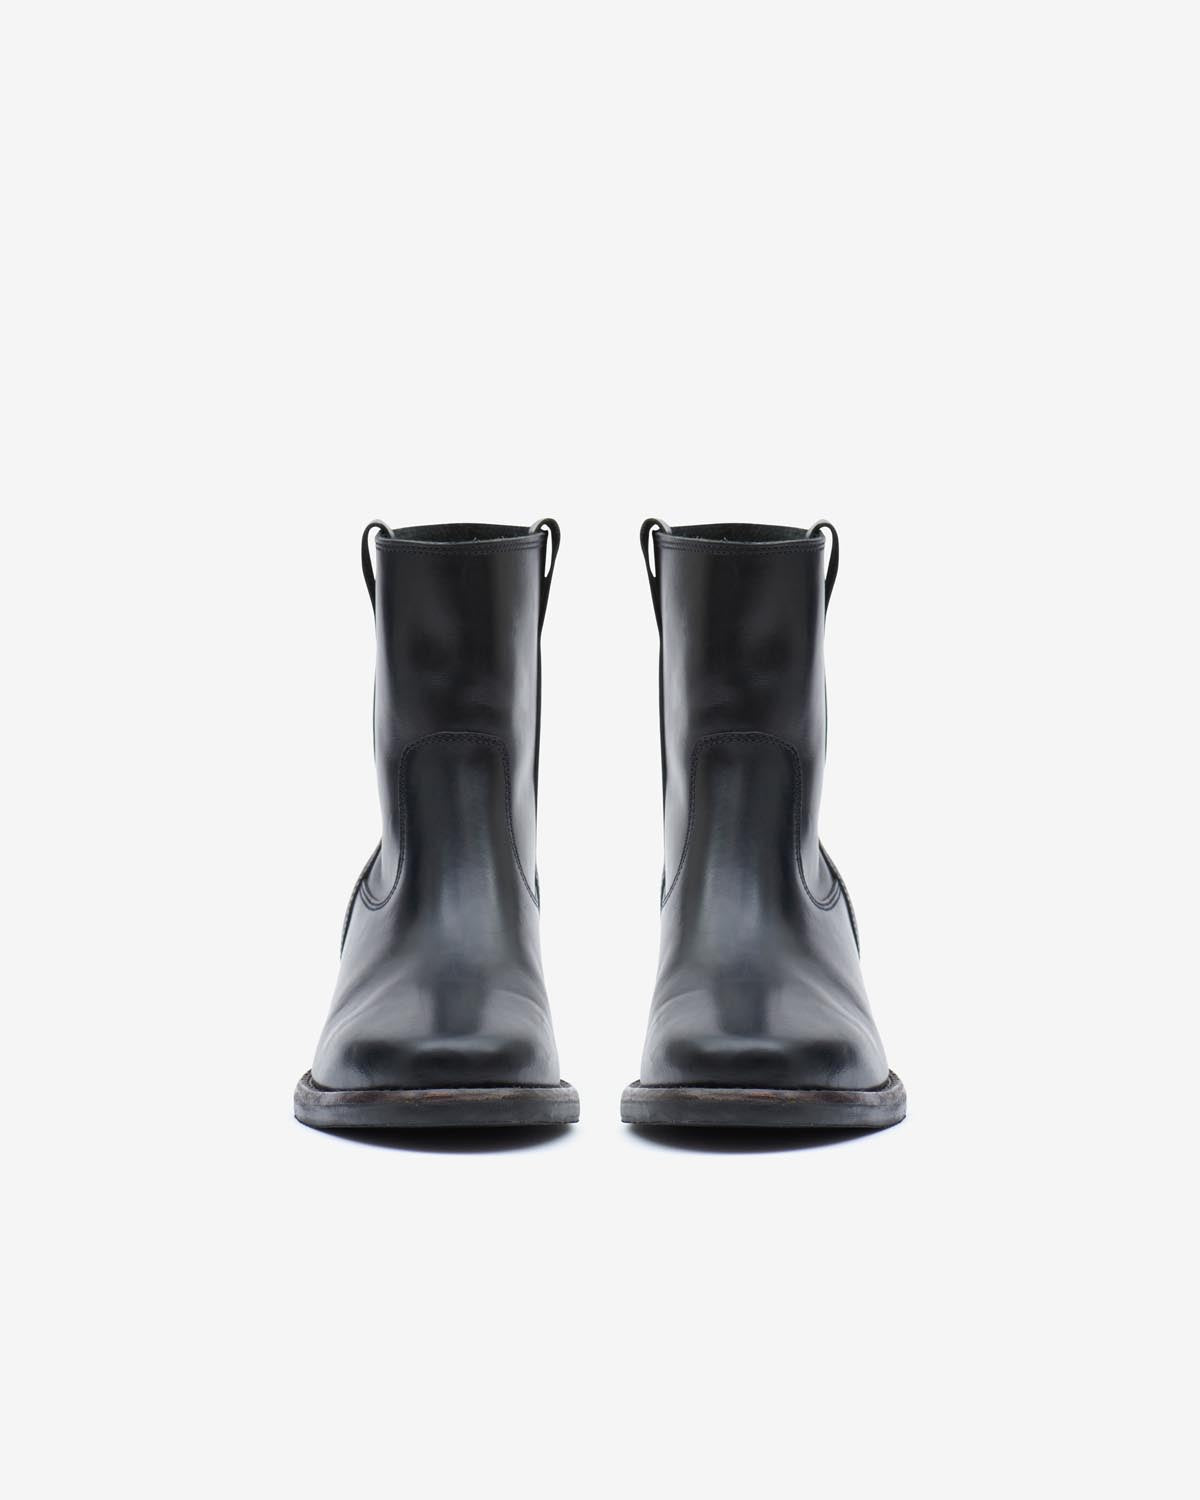 Susee low boots Woman Black 4